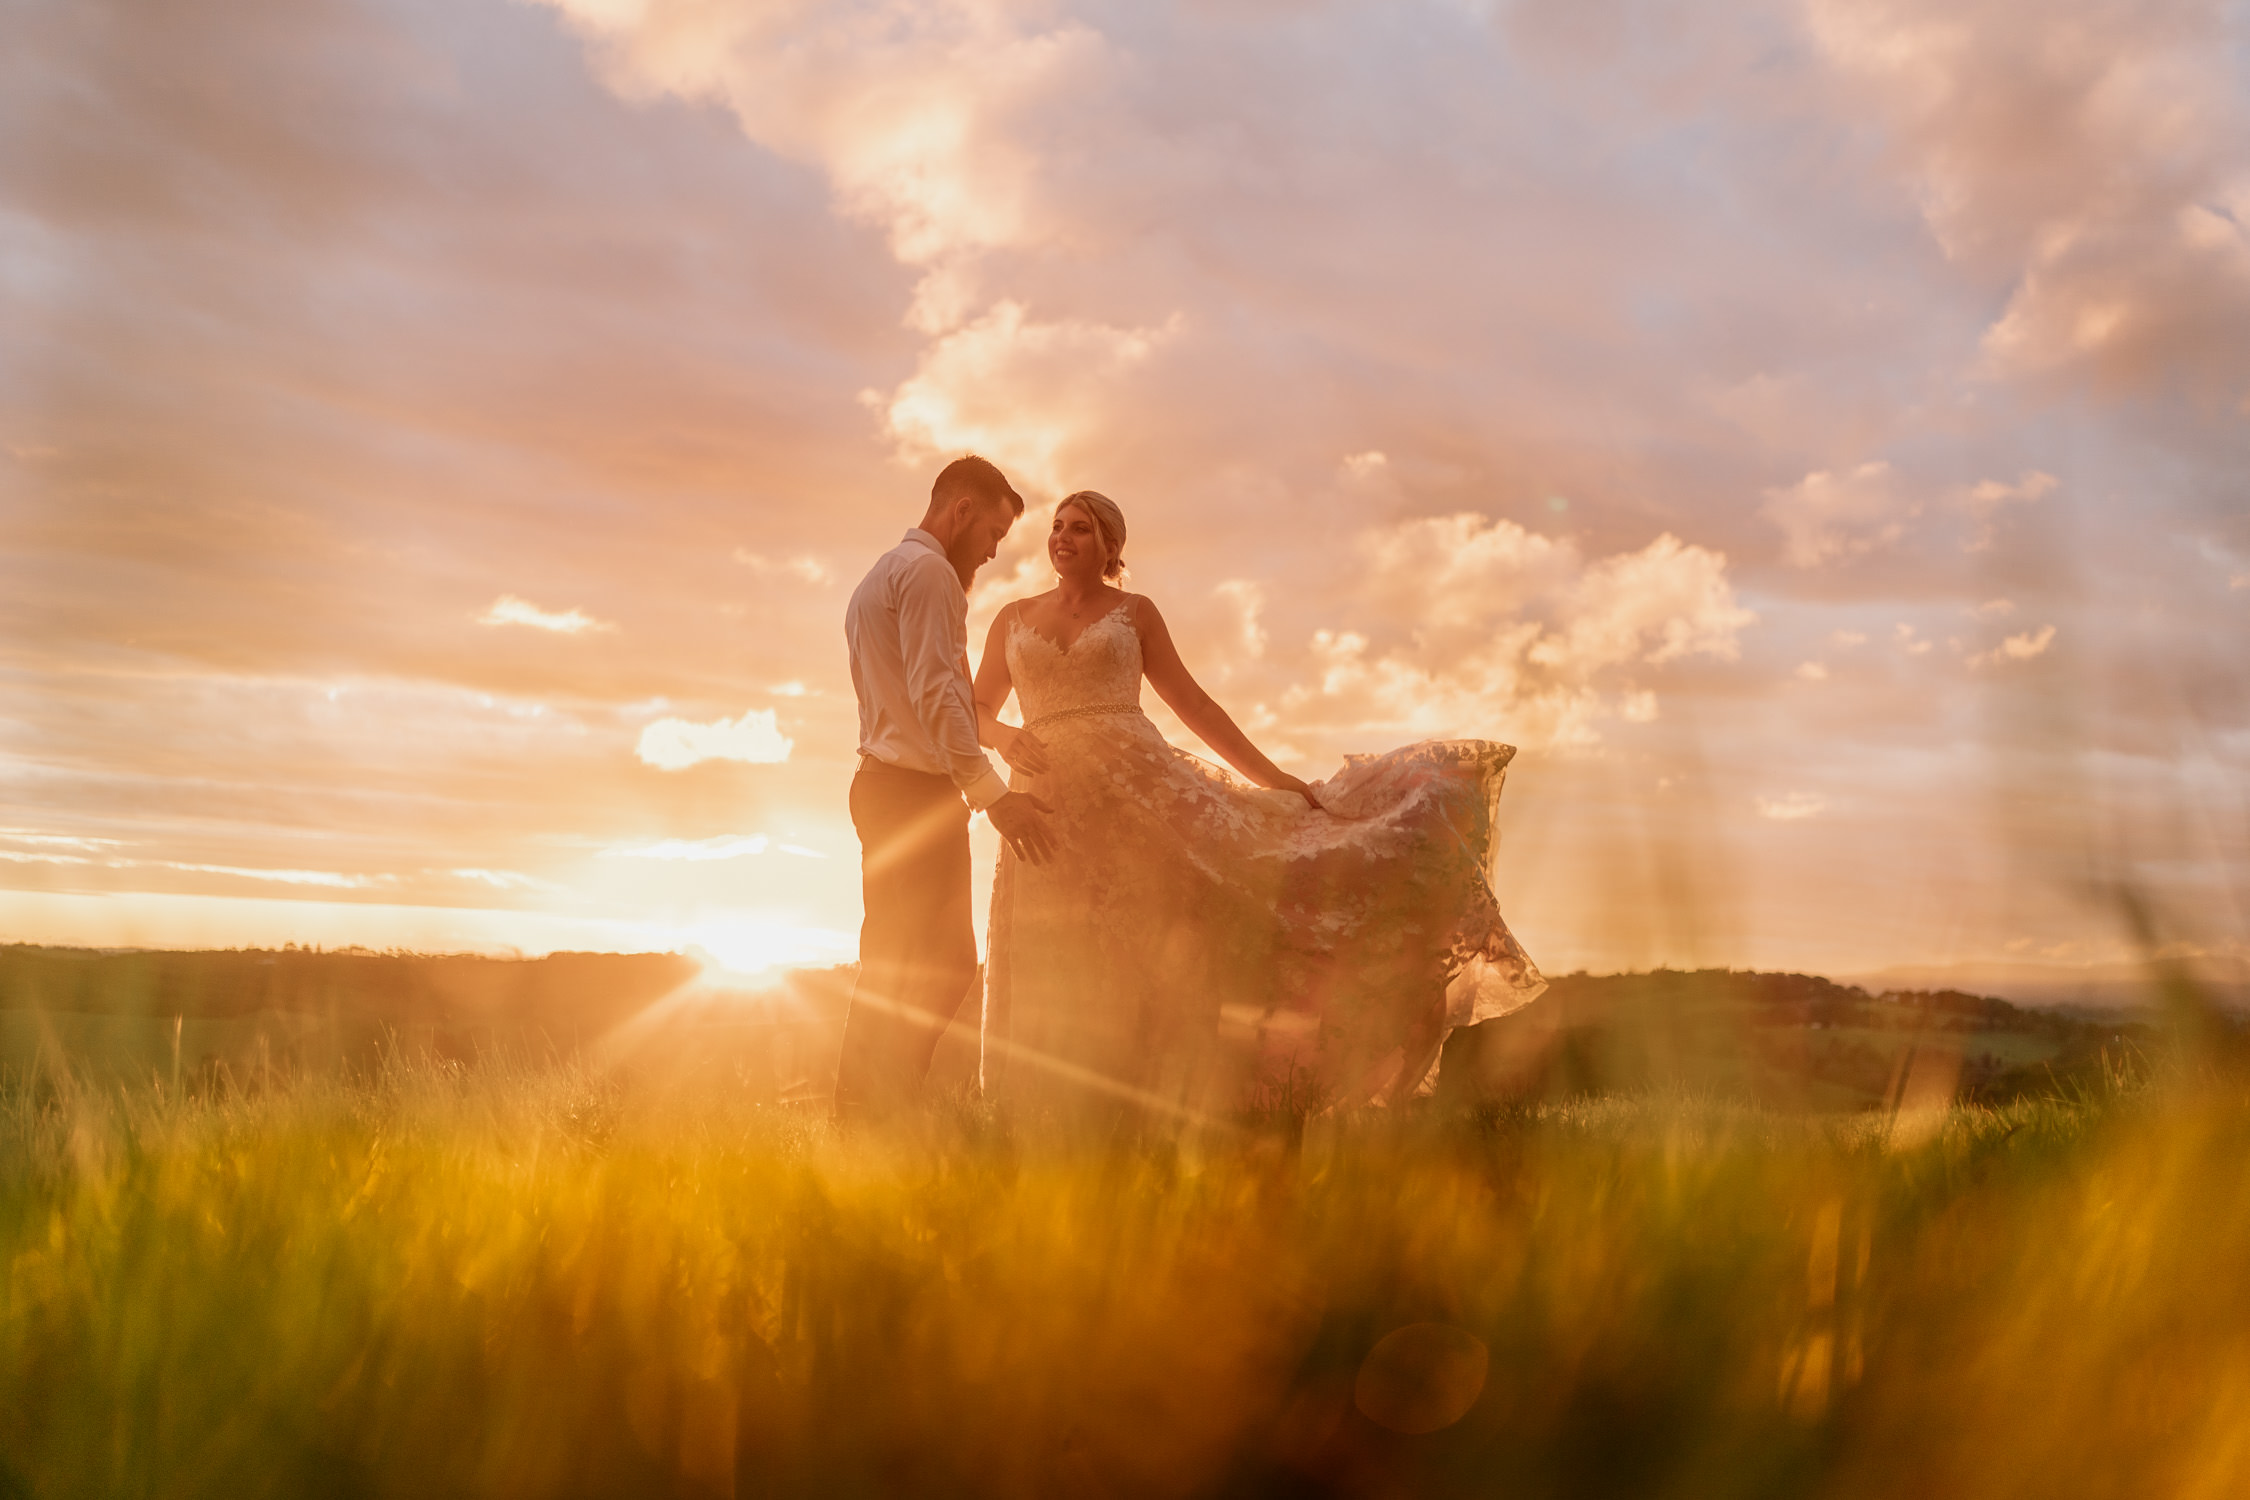 Byron View Farm Wedding bride and groom at sunset with amazing coloured sky